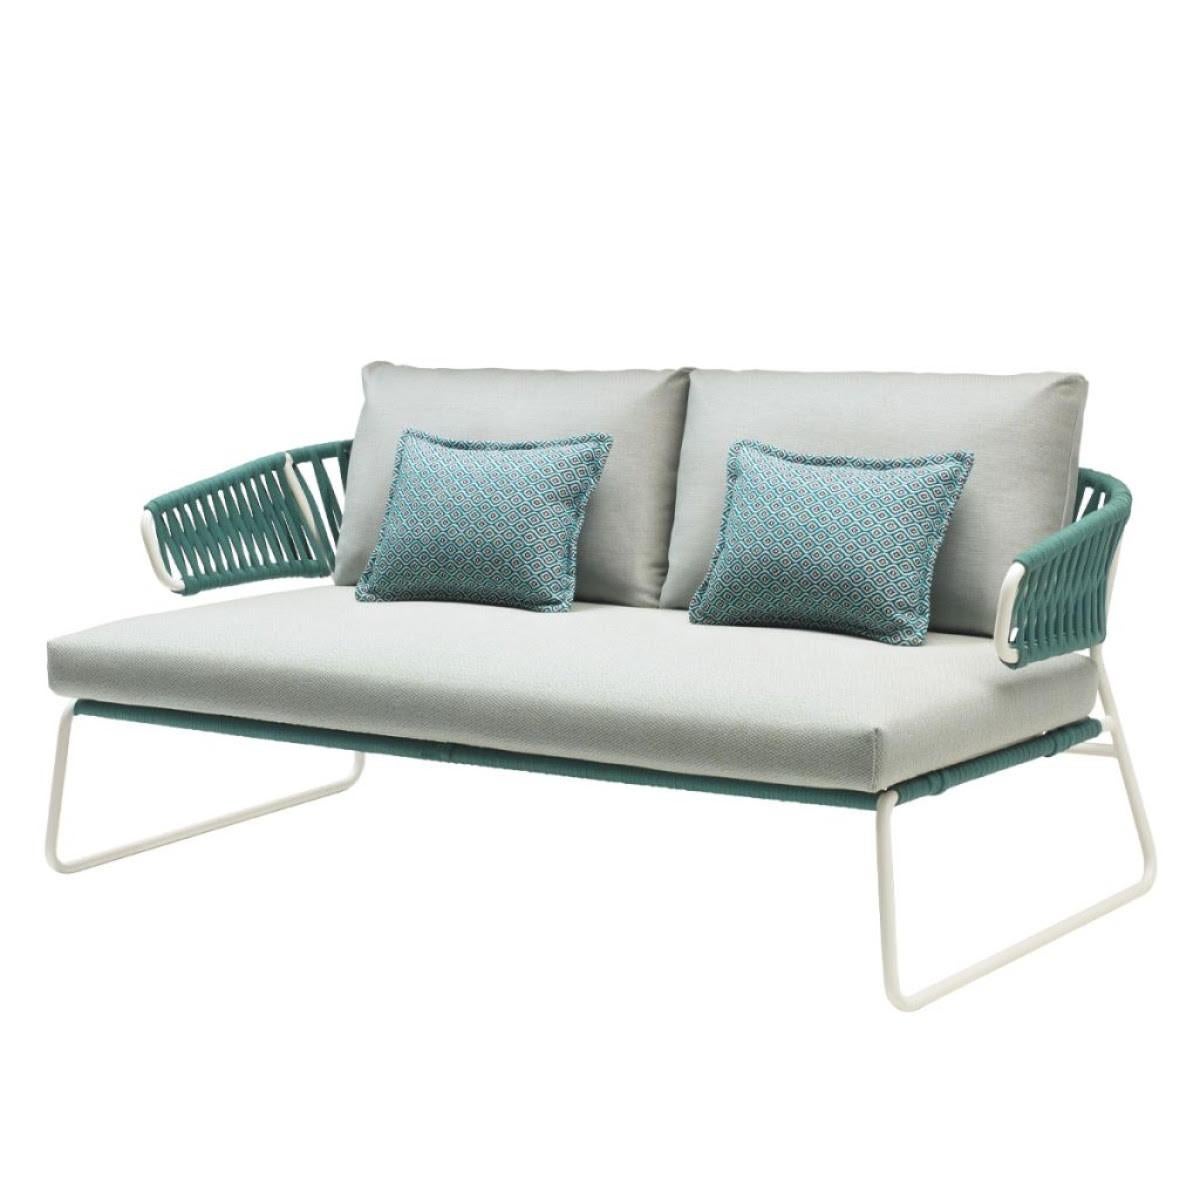 Modern Grey Outdoor or Indoor Sofa in Metal and Cord, 21 Century For Sale 2